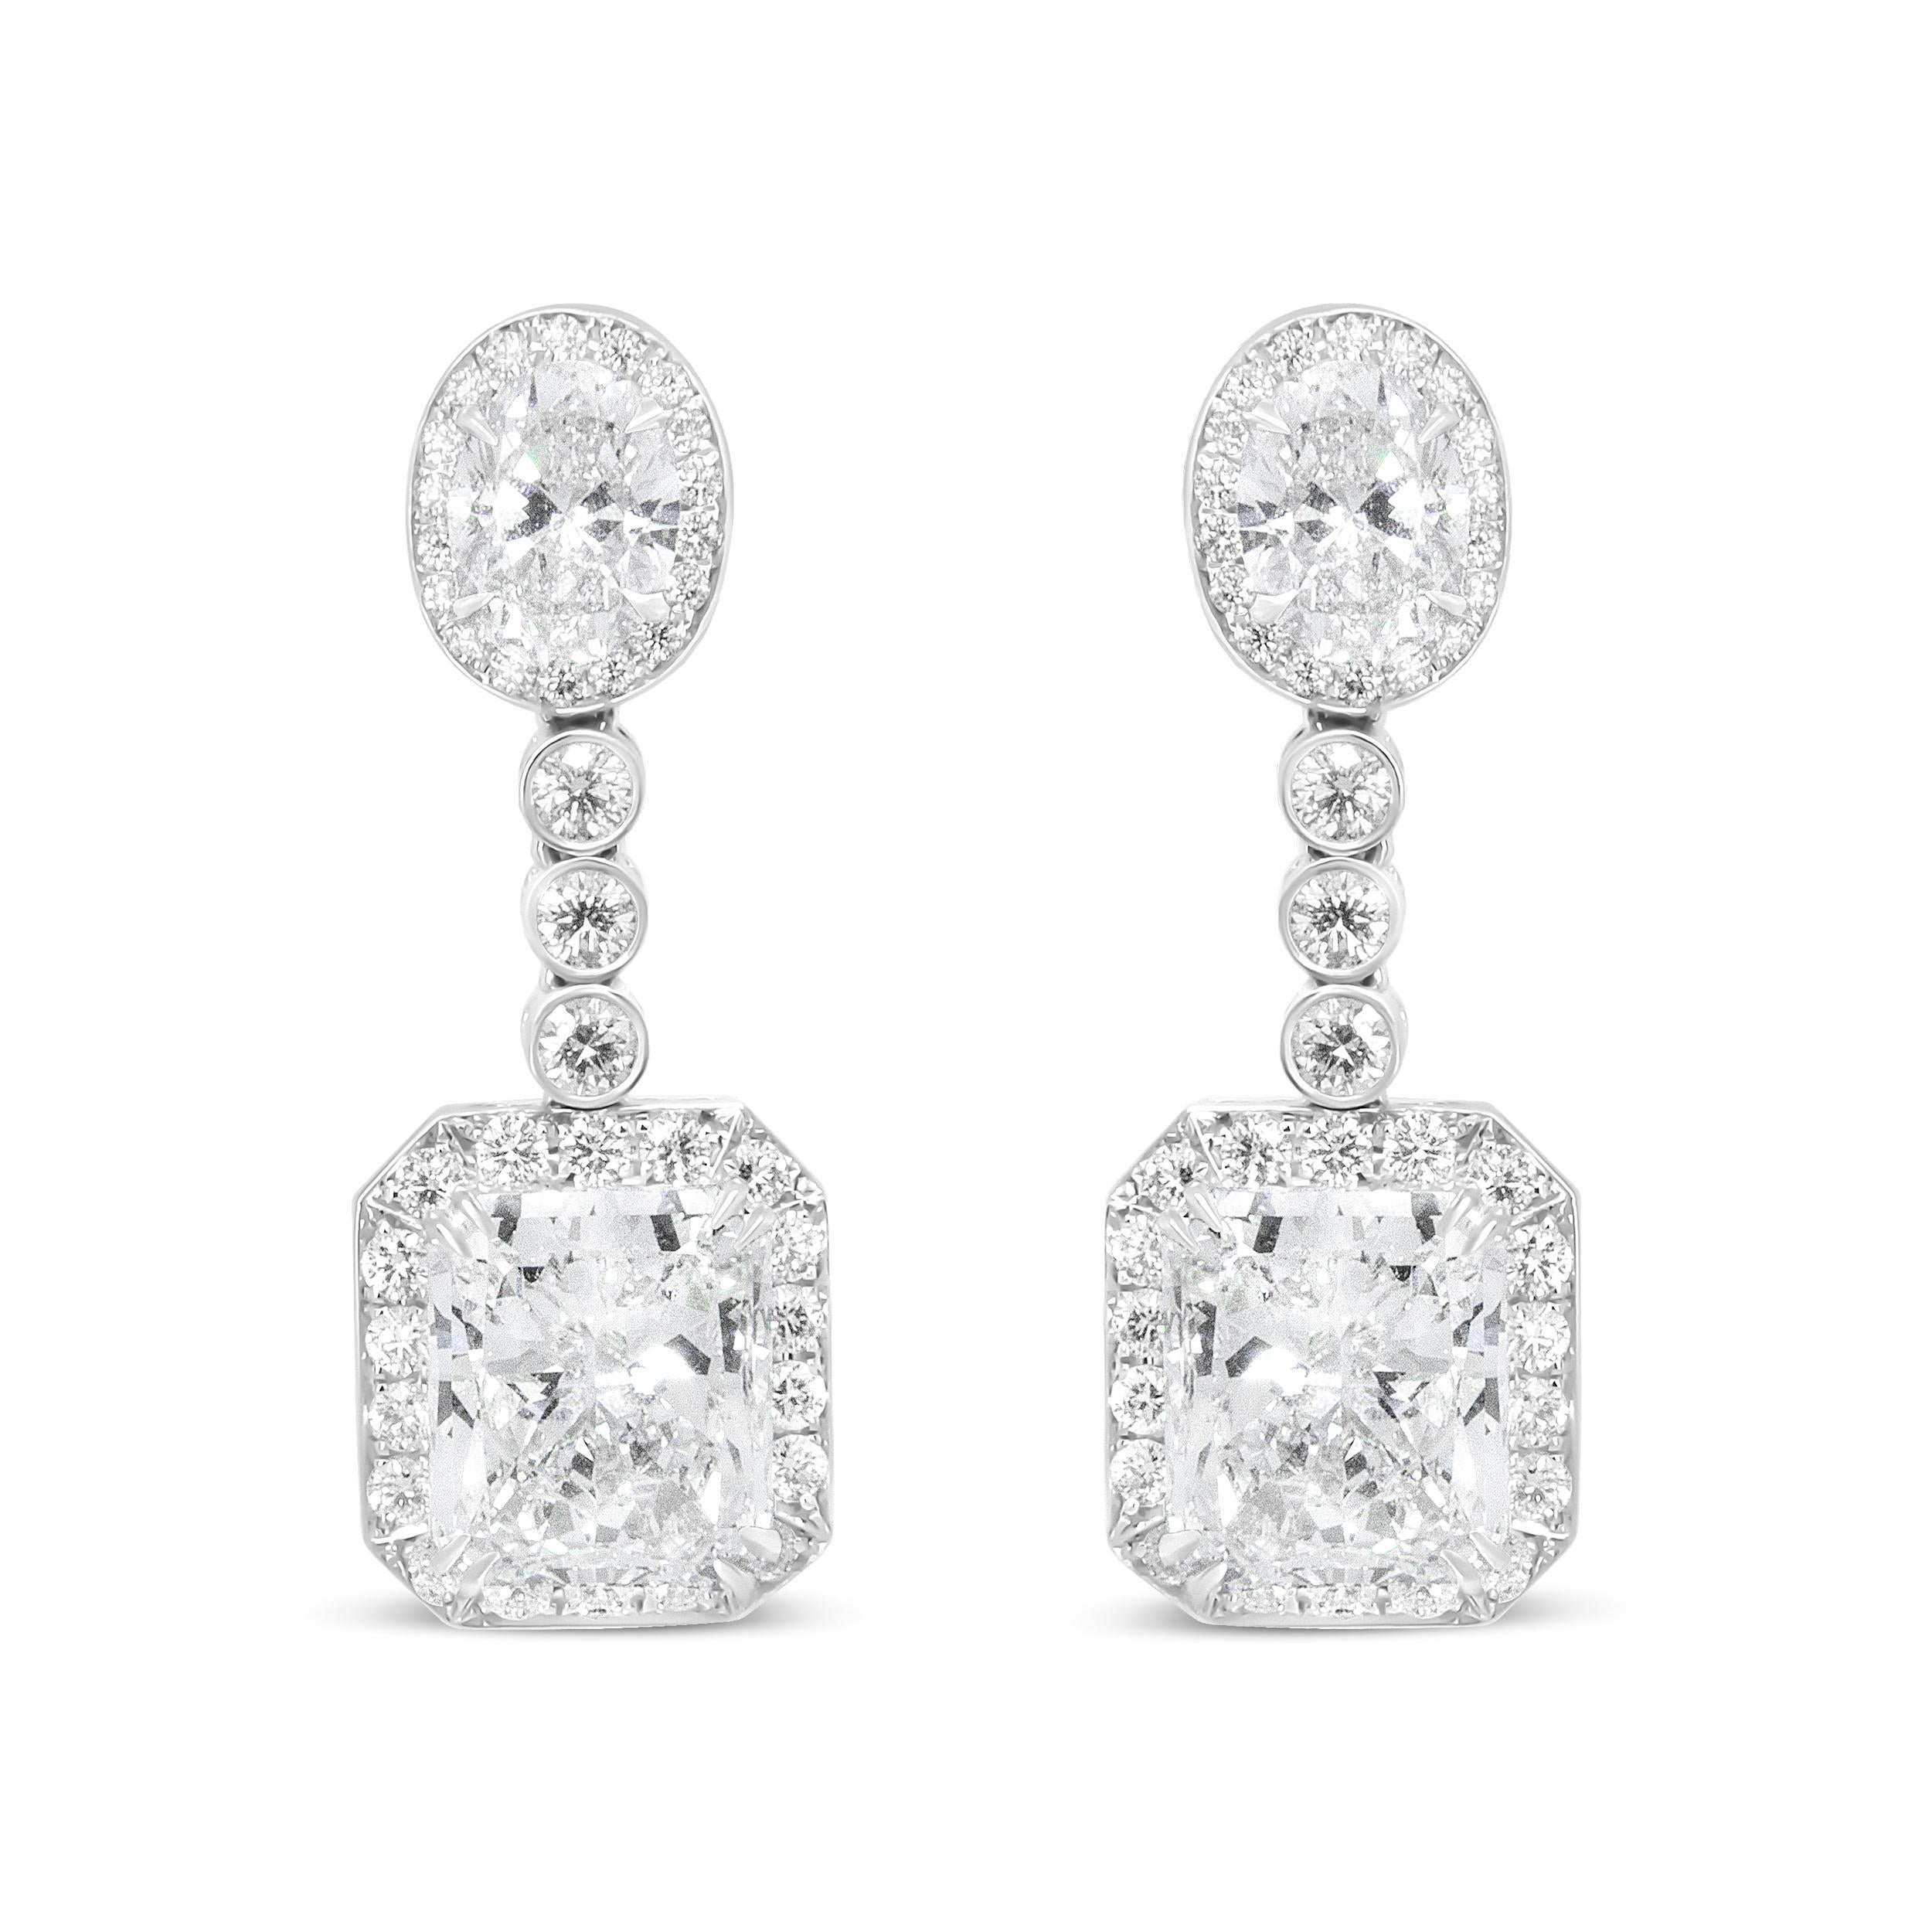 Celebrate the special moments in life with this pair of exquisite GIA Certified emerald and oval cut diamond dangle drop earrings. Graceful shapes, artful femininity, and an exquisite display of precious stones are at the center of this masterpiece